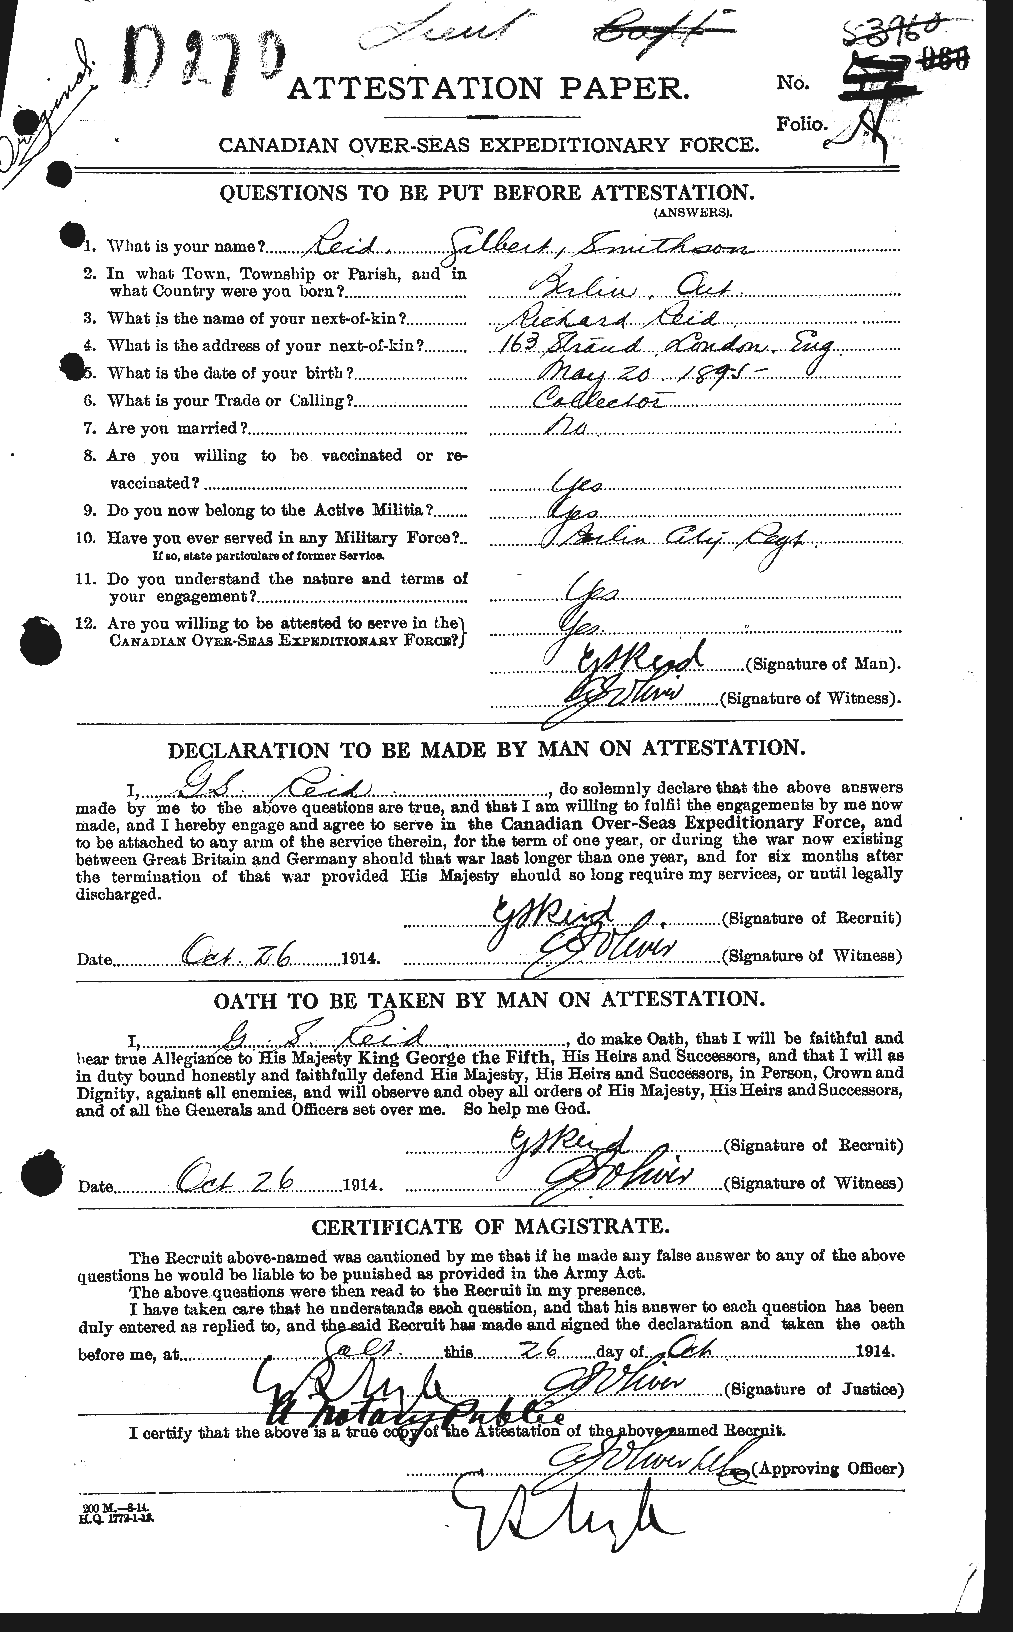 Personnel Records of the First World War - CEF 598554a